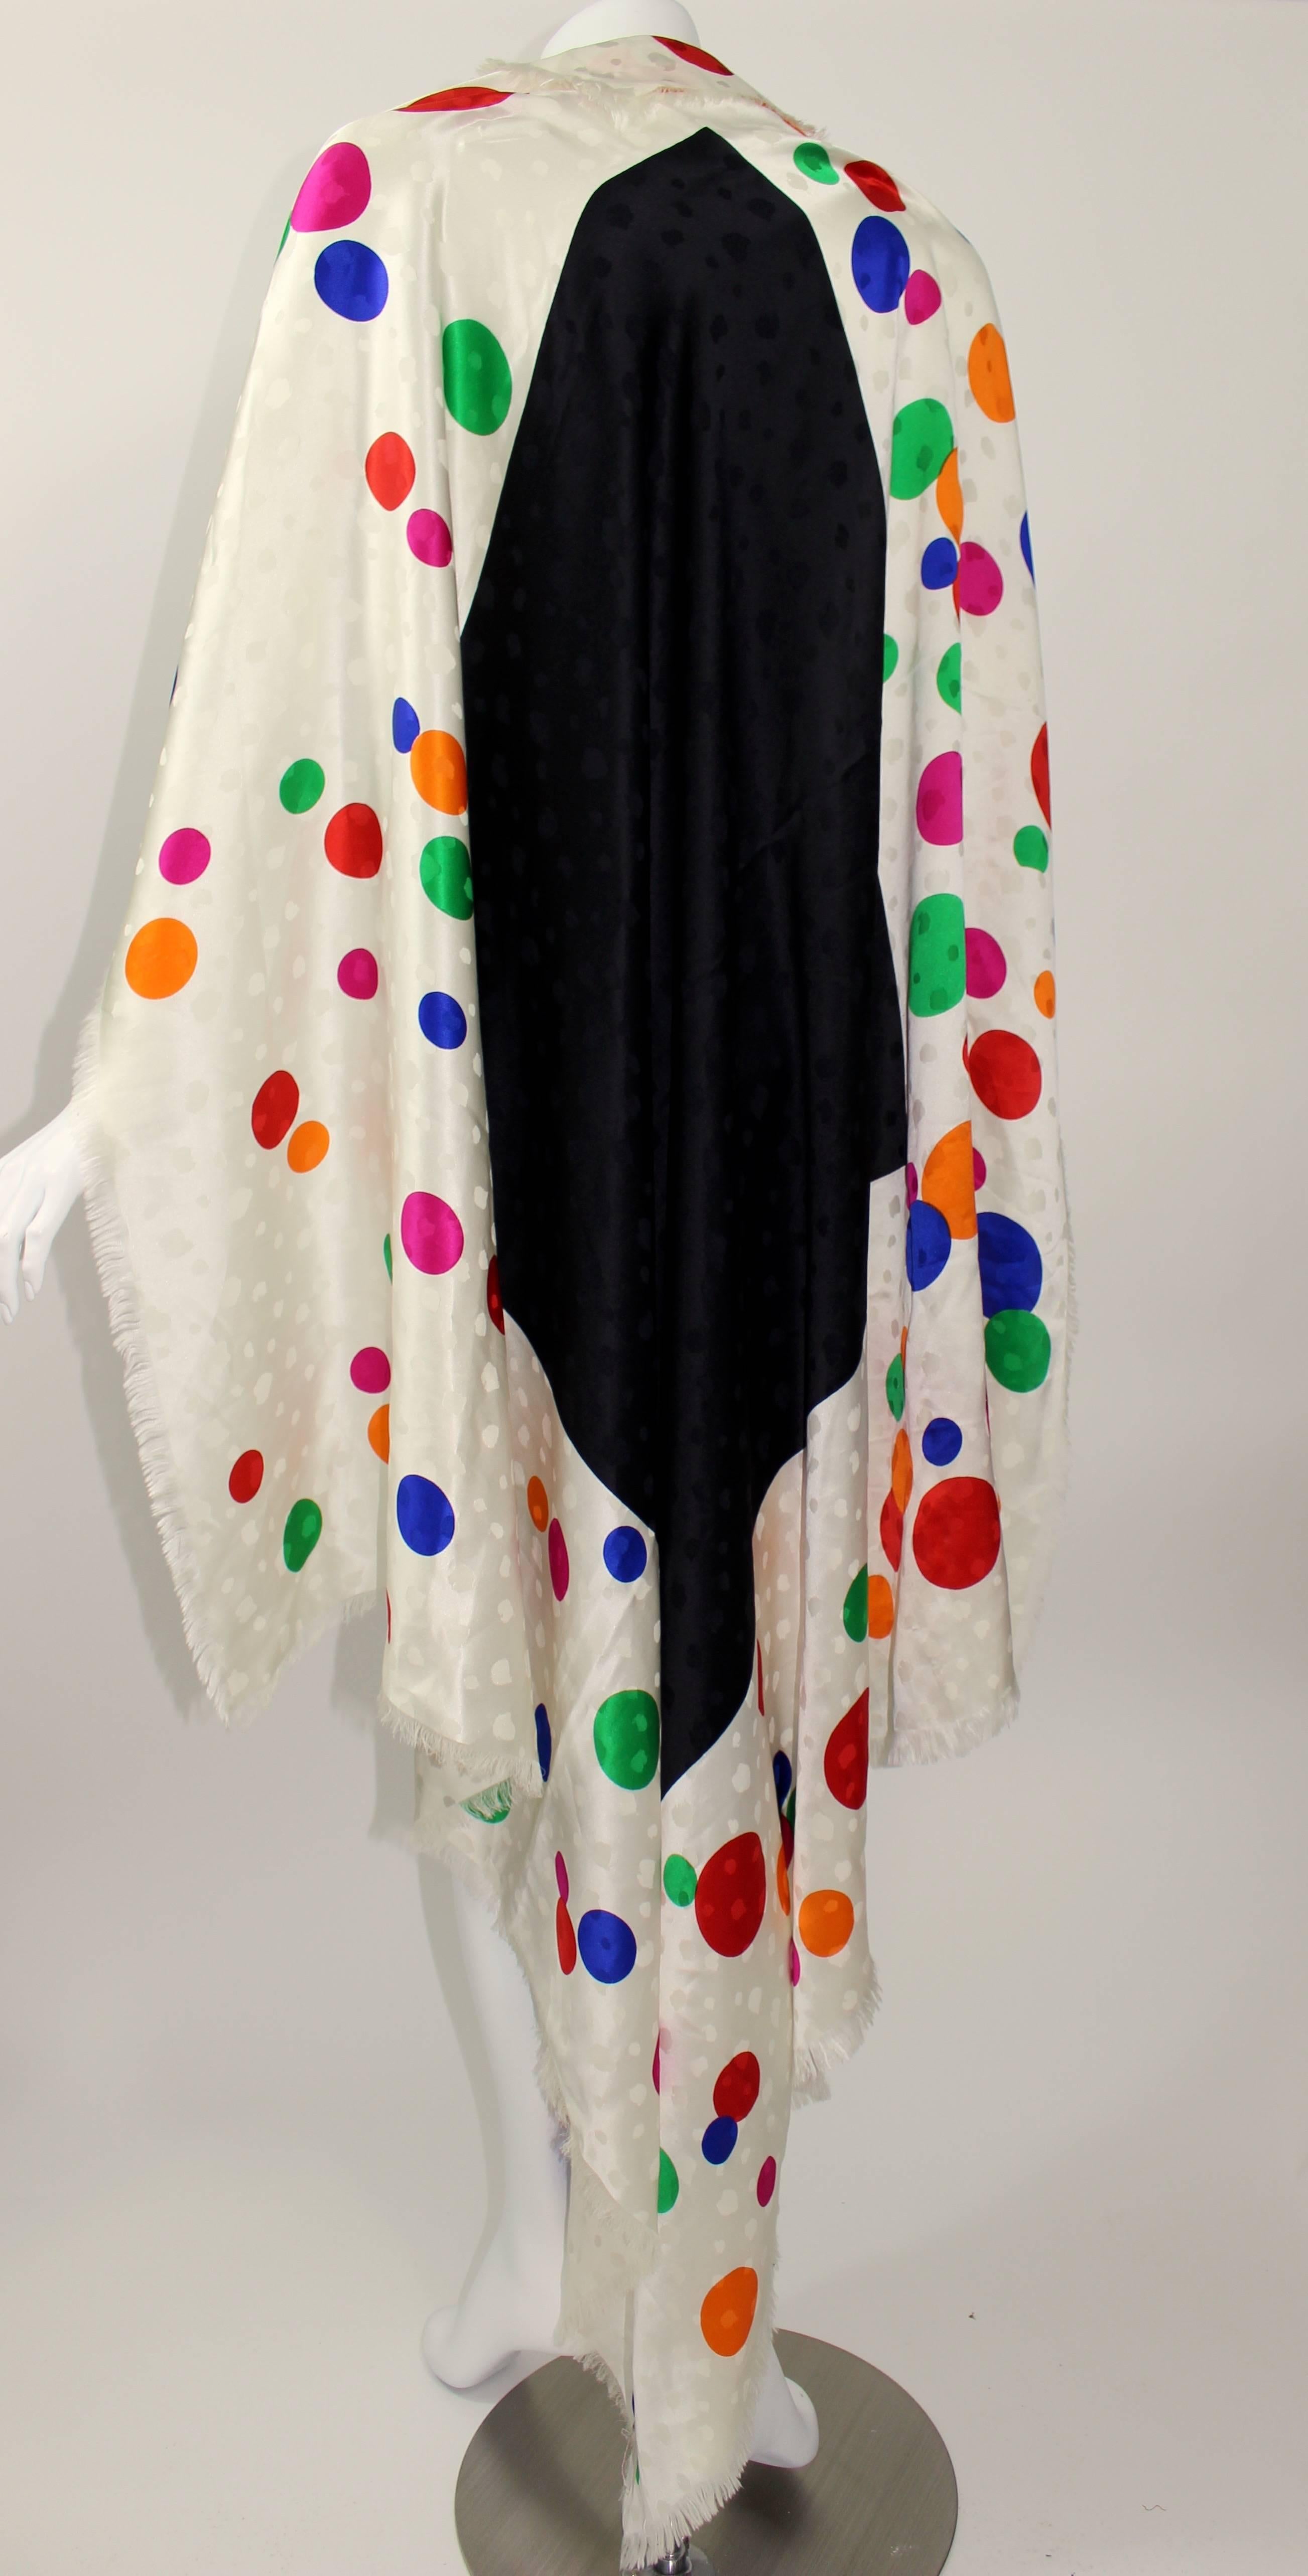 A beautiful and huge colorful vintage silk shawl from Saint Laurent. 
So many details of color, pattern and texture. Subtle flocked detail noticed most when the shawl catches the light. 
The center is black and the outer is ivory with all different